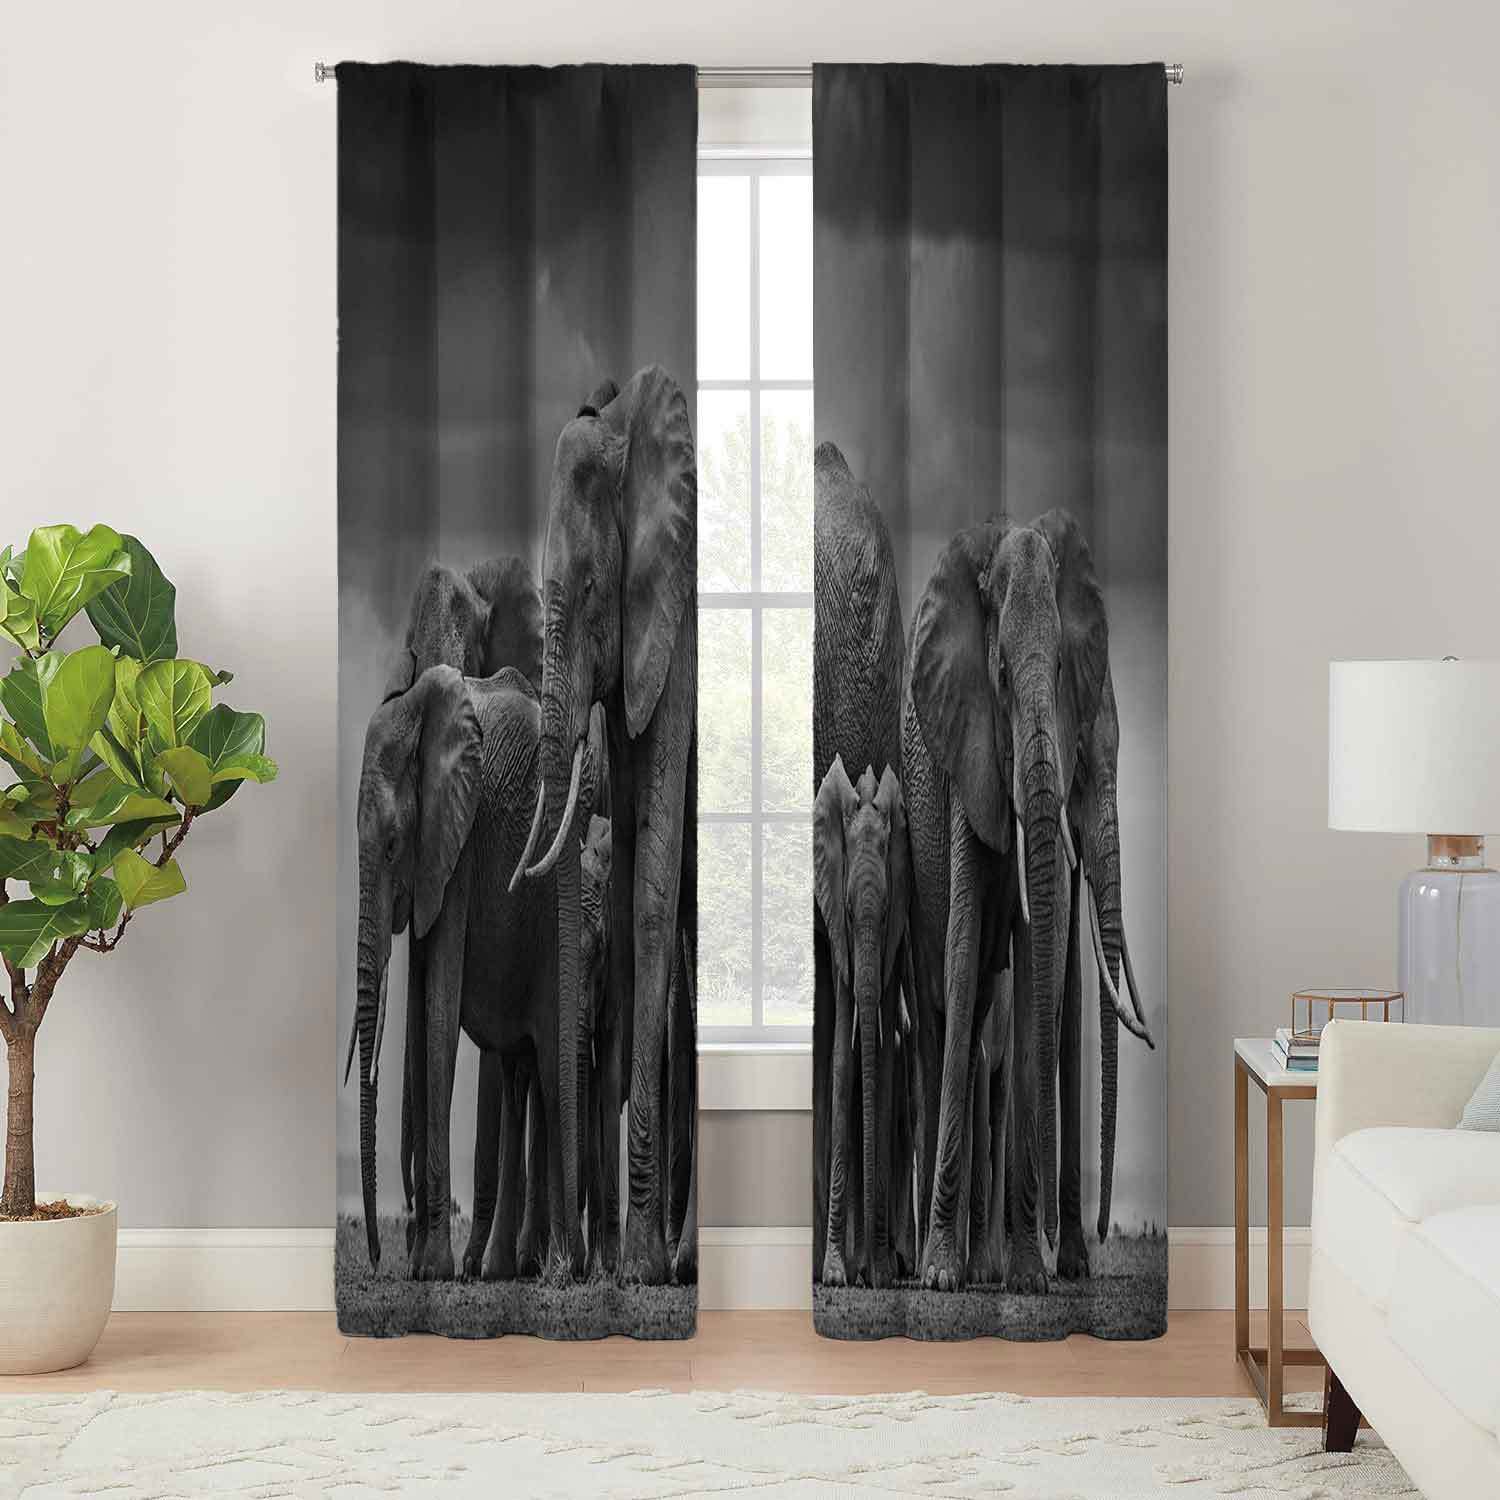 

2pcs/set, Modern Minimalist Style Living Room Decor Curtains, Elephant Animal Pattern Printed Curtains, Easy Care, 4 Seasons Charm, Durable And Easy To Hang For Home Decor